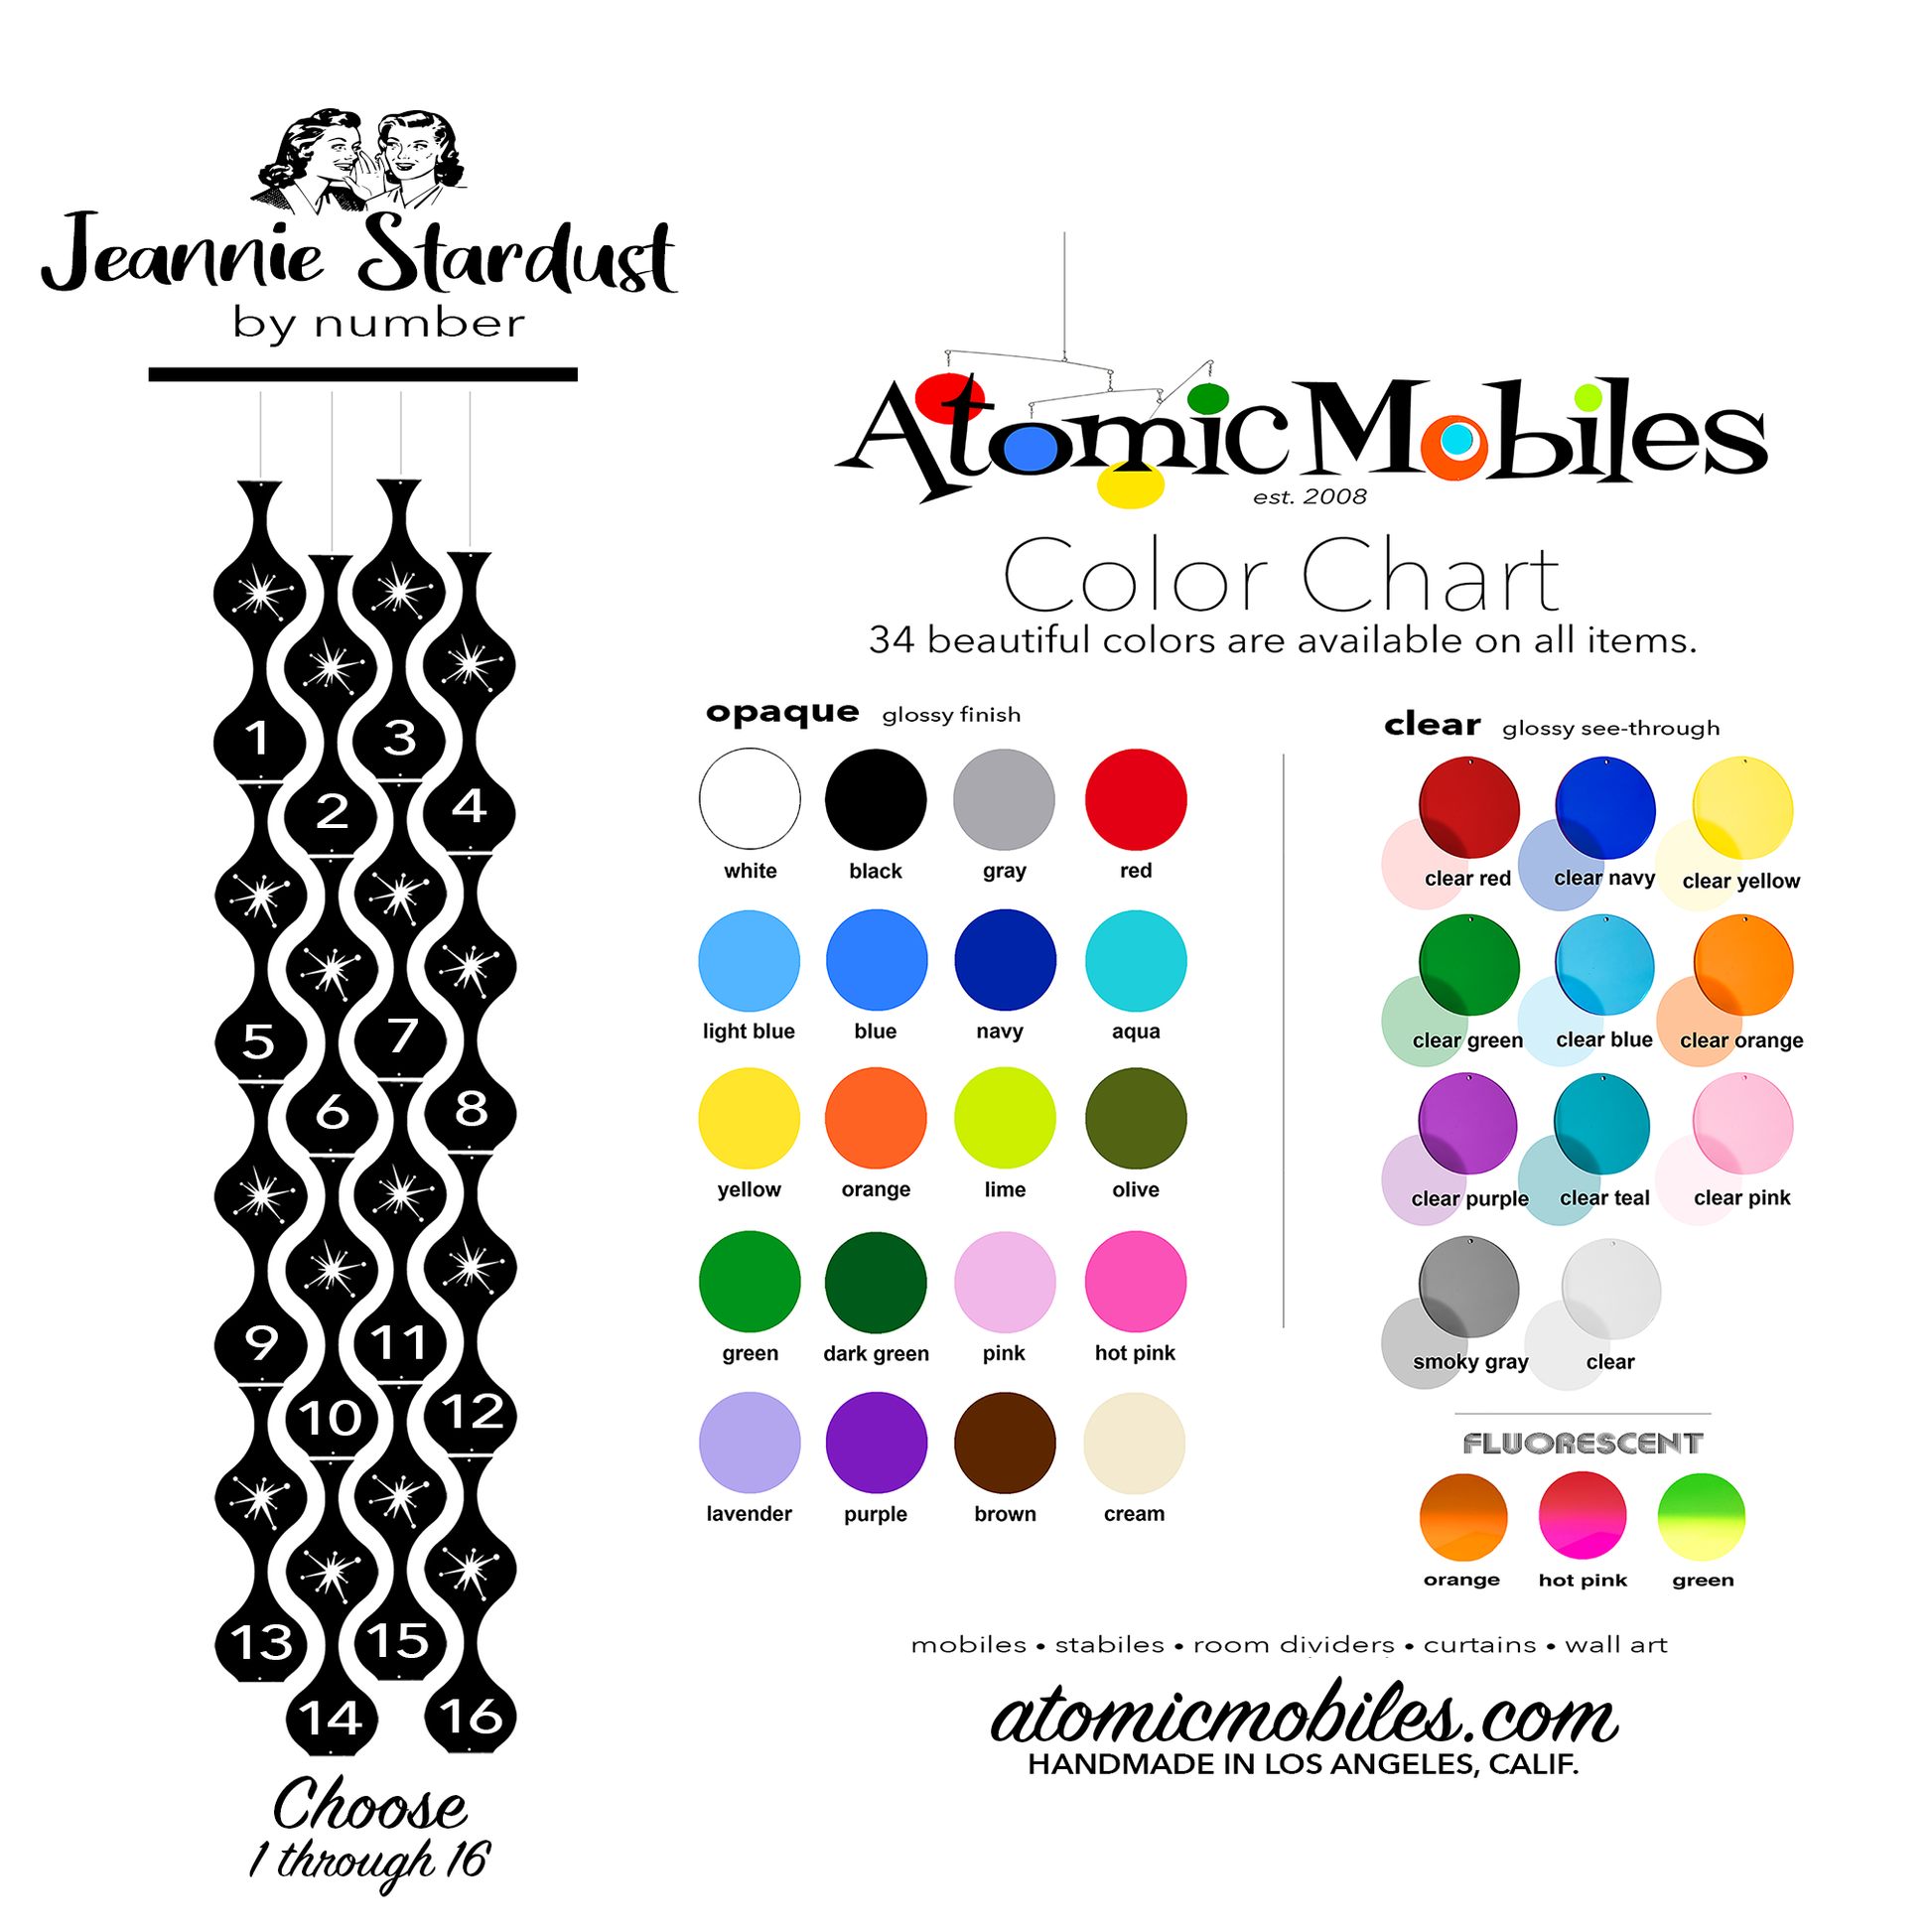 Jeannie Stardust Retro Mid Century Modern Mobiles Color Chart - Choose your own colors - by AtomicMobiles.com